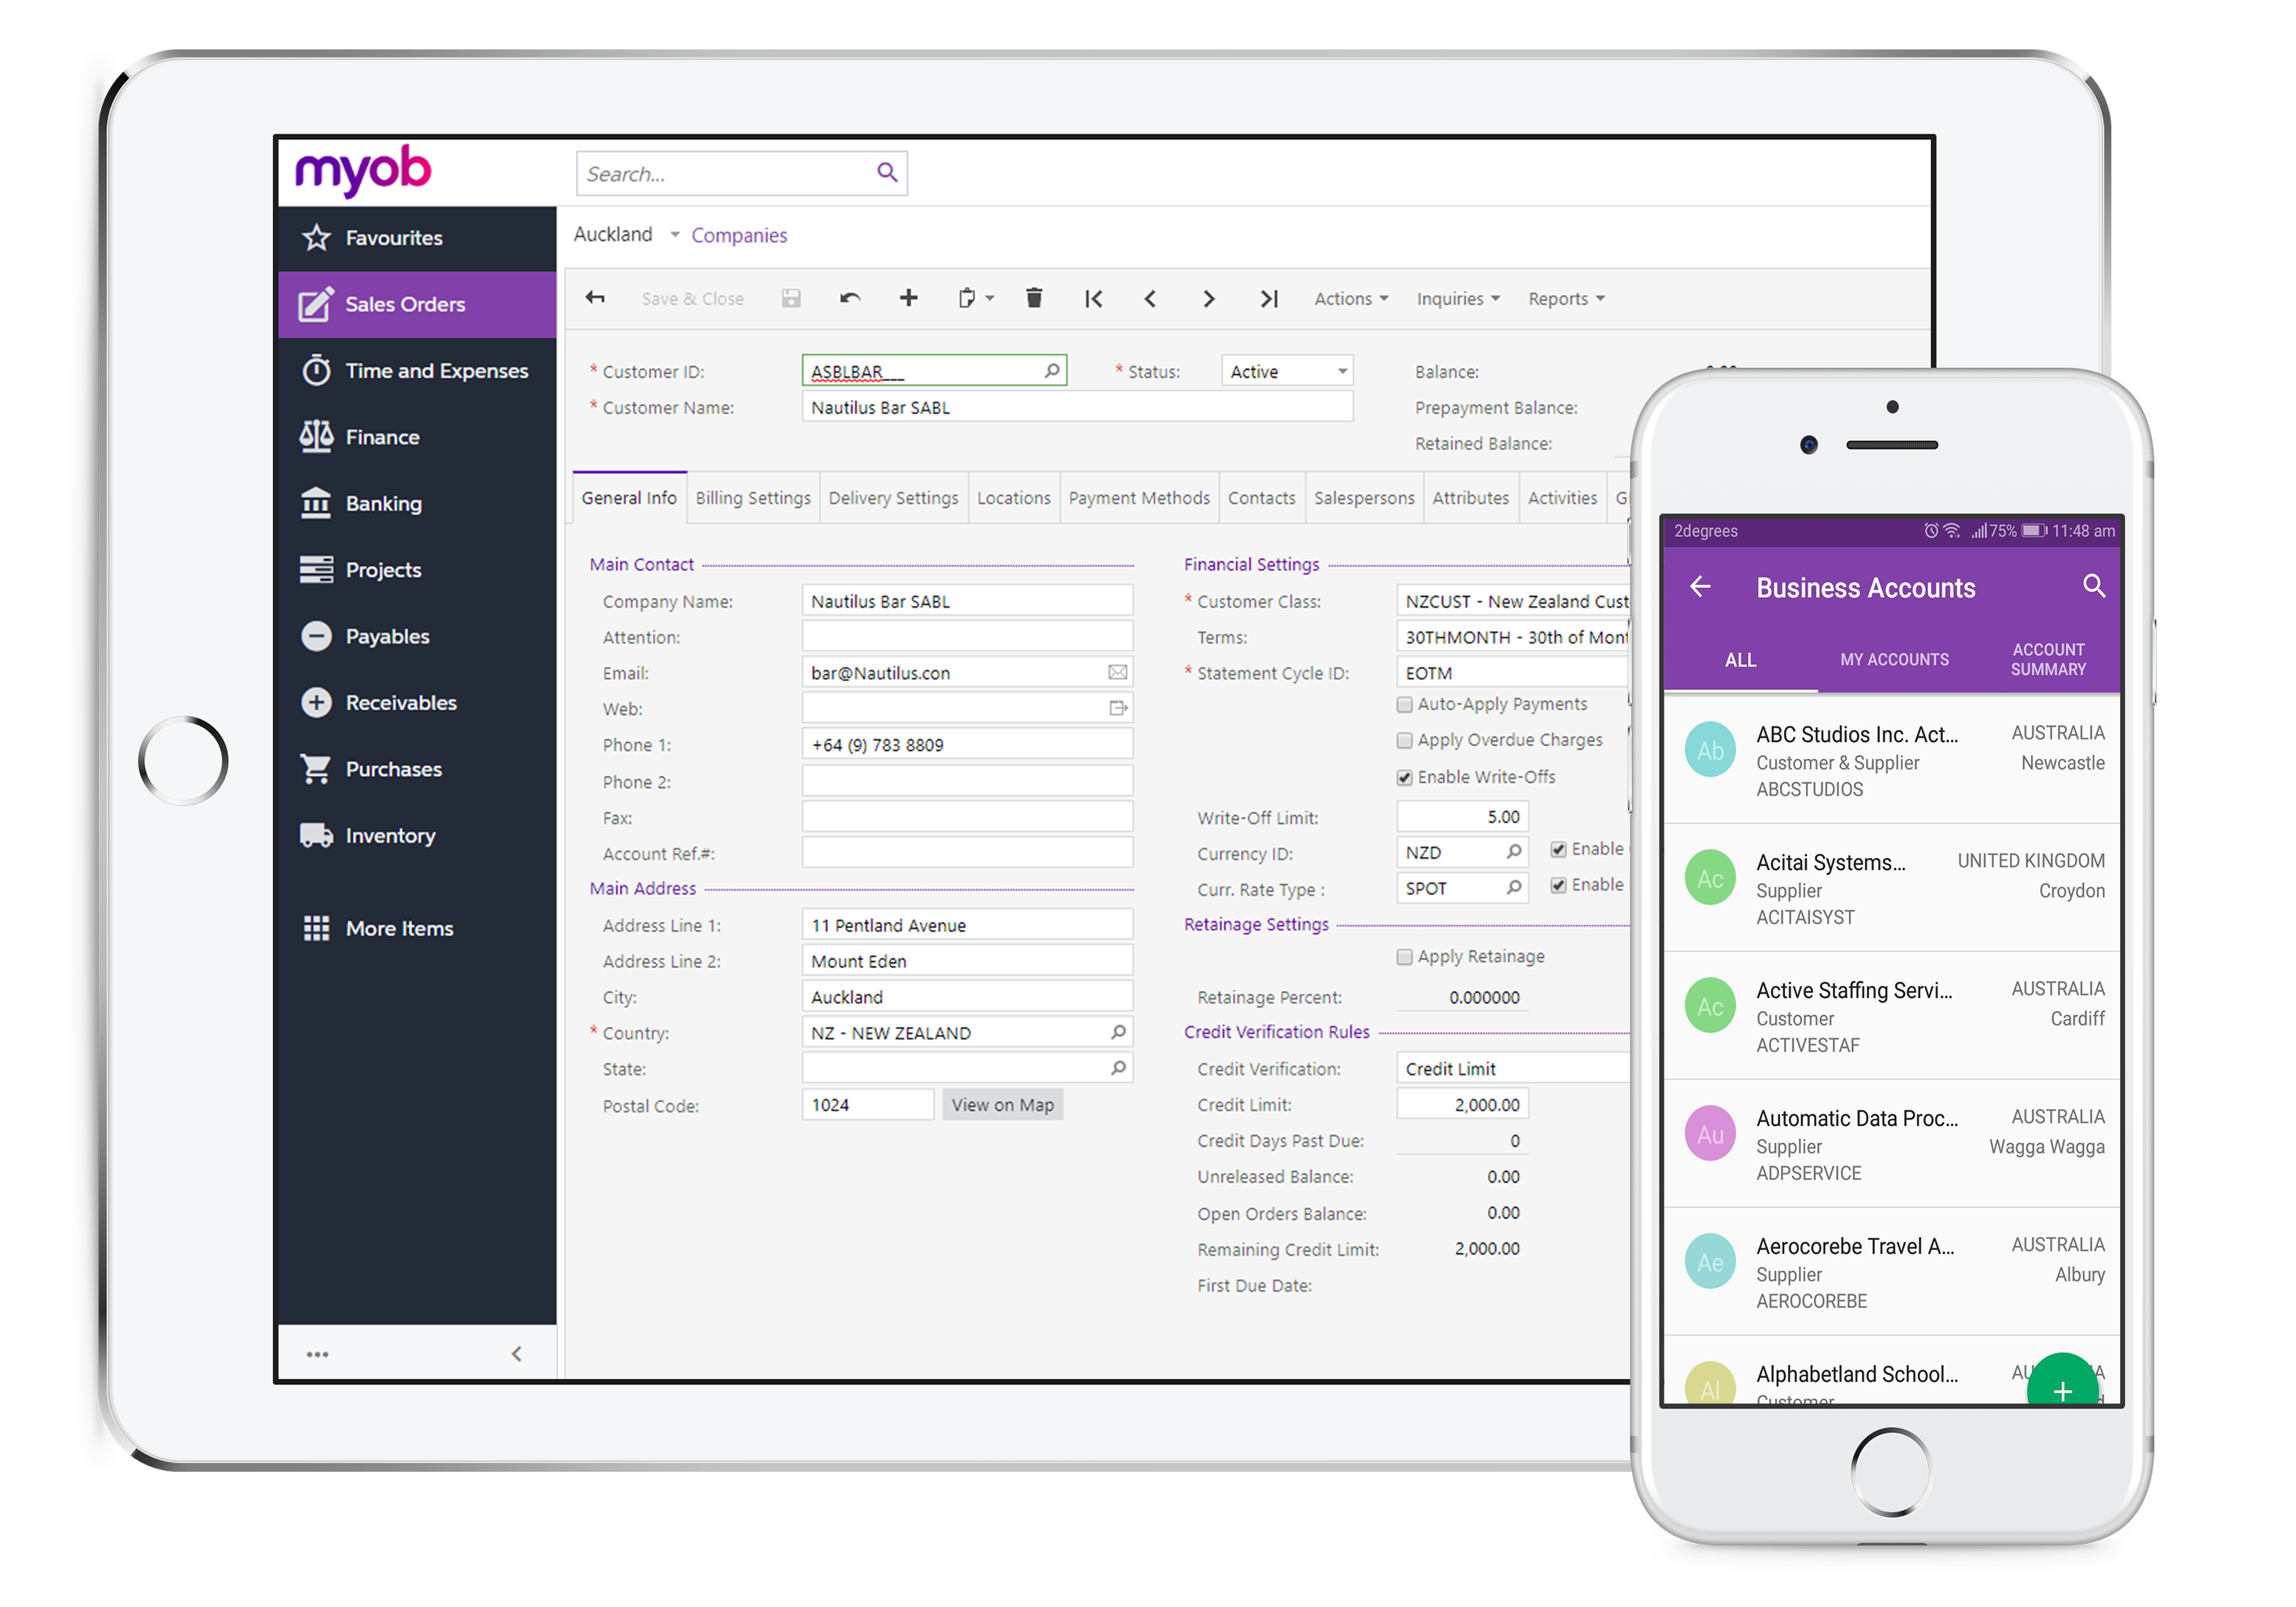 MYOB Advanced Business Software - Mobile solutions liberate service, sales, and warehouse teams from bottlenecks and hurdles. Unlock efficiencies, eliminate admin backlog, reduce data errors and increase customer satisfaction.